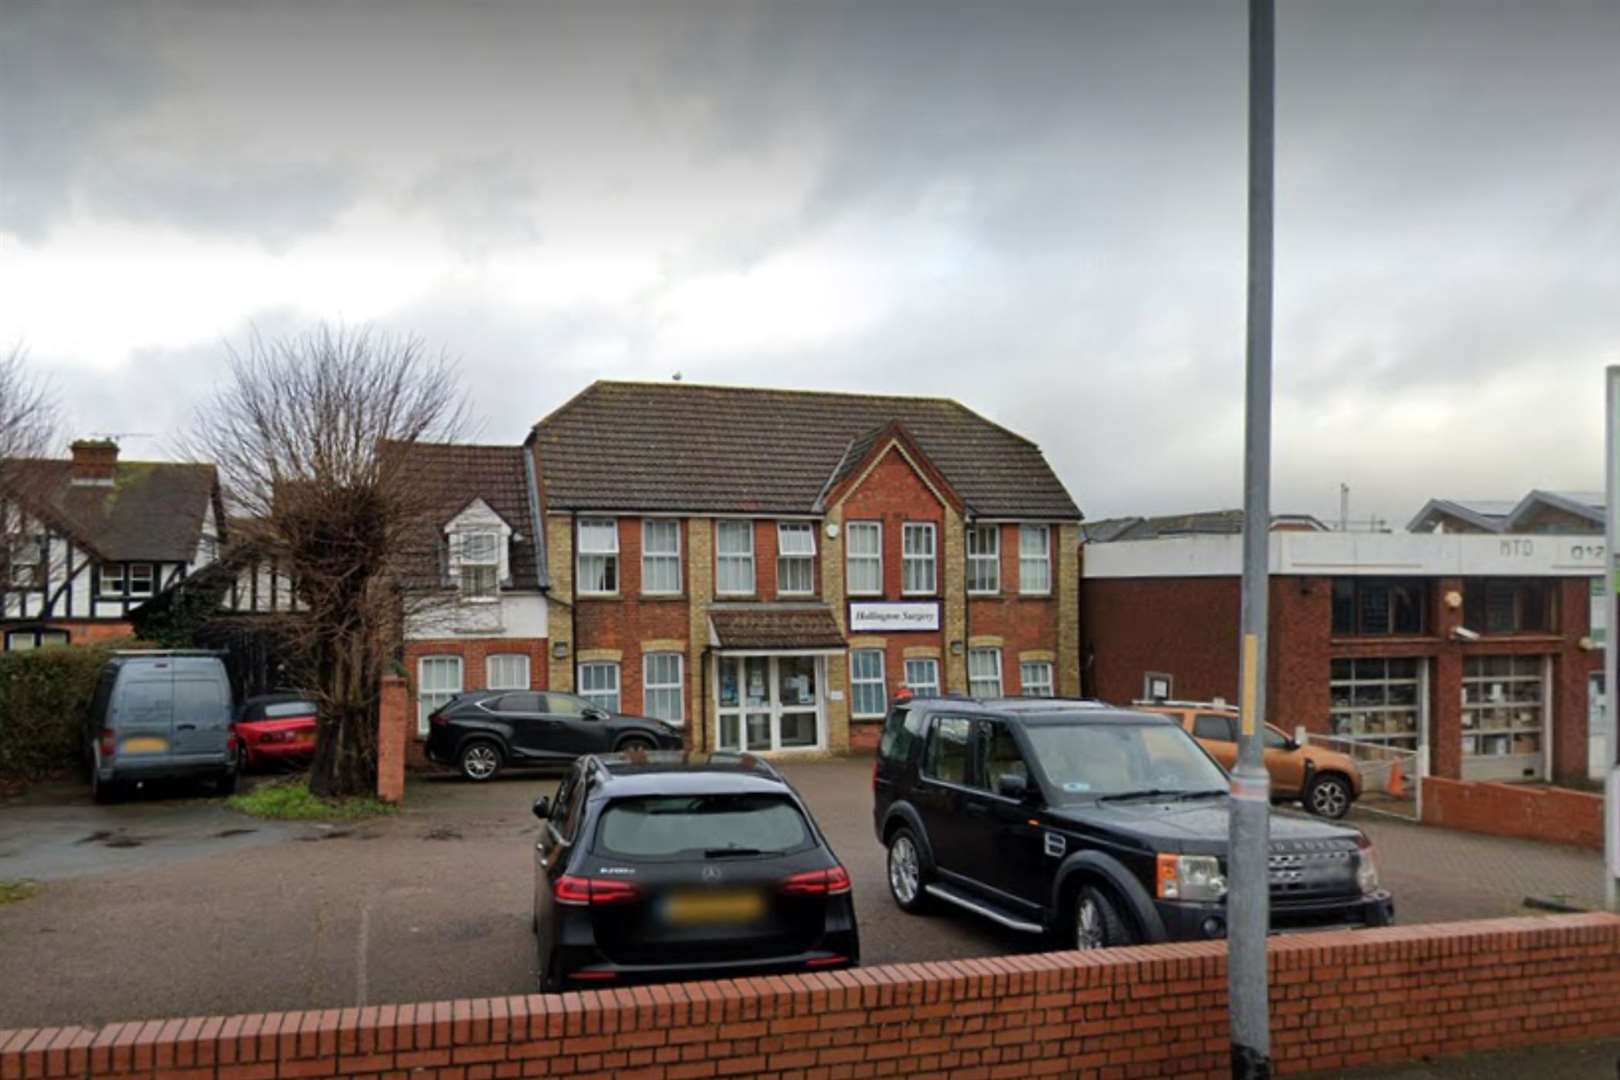 Hollington Surgery will be merging with Sydenham House. Picture: Google Maps